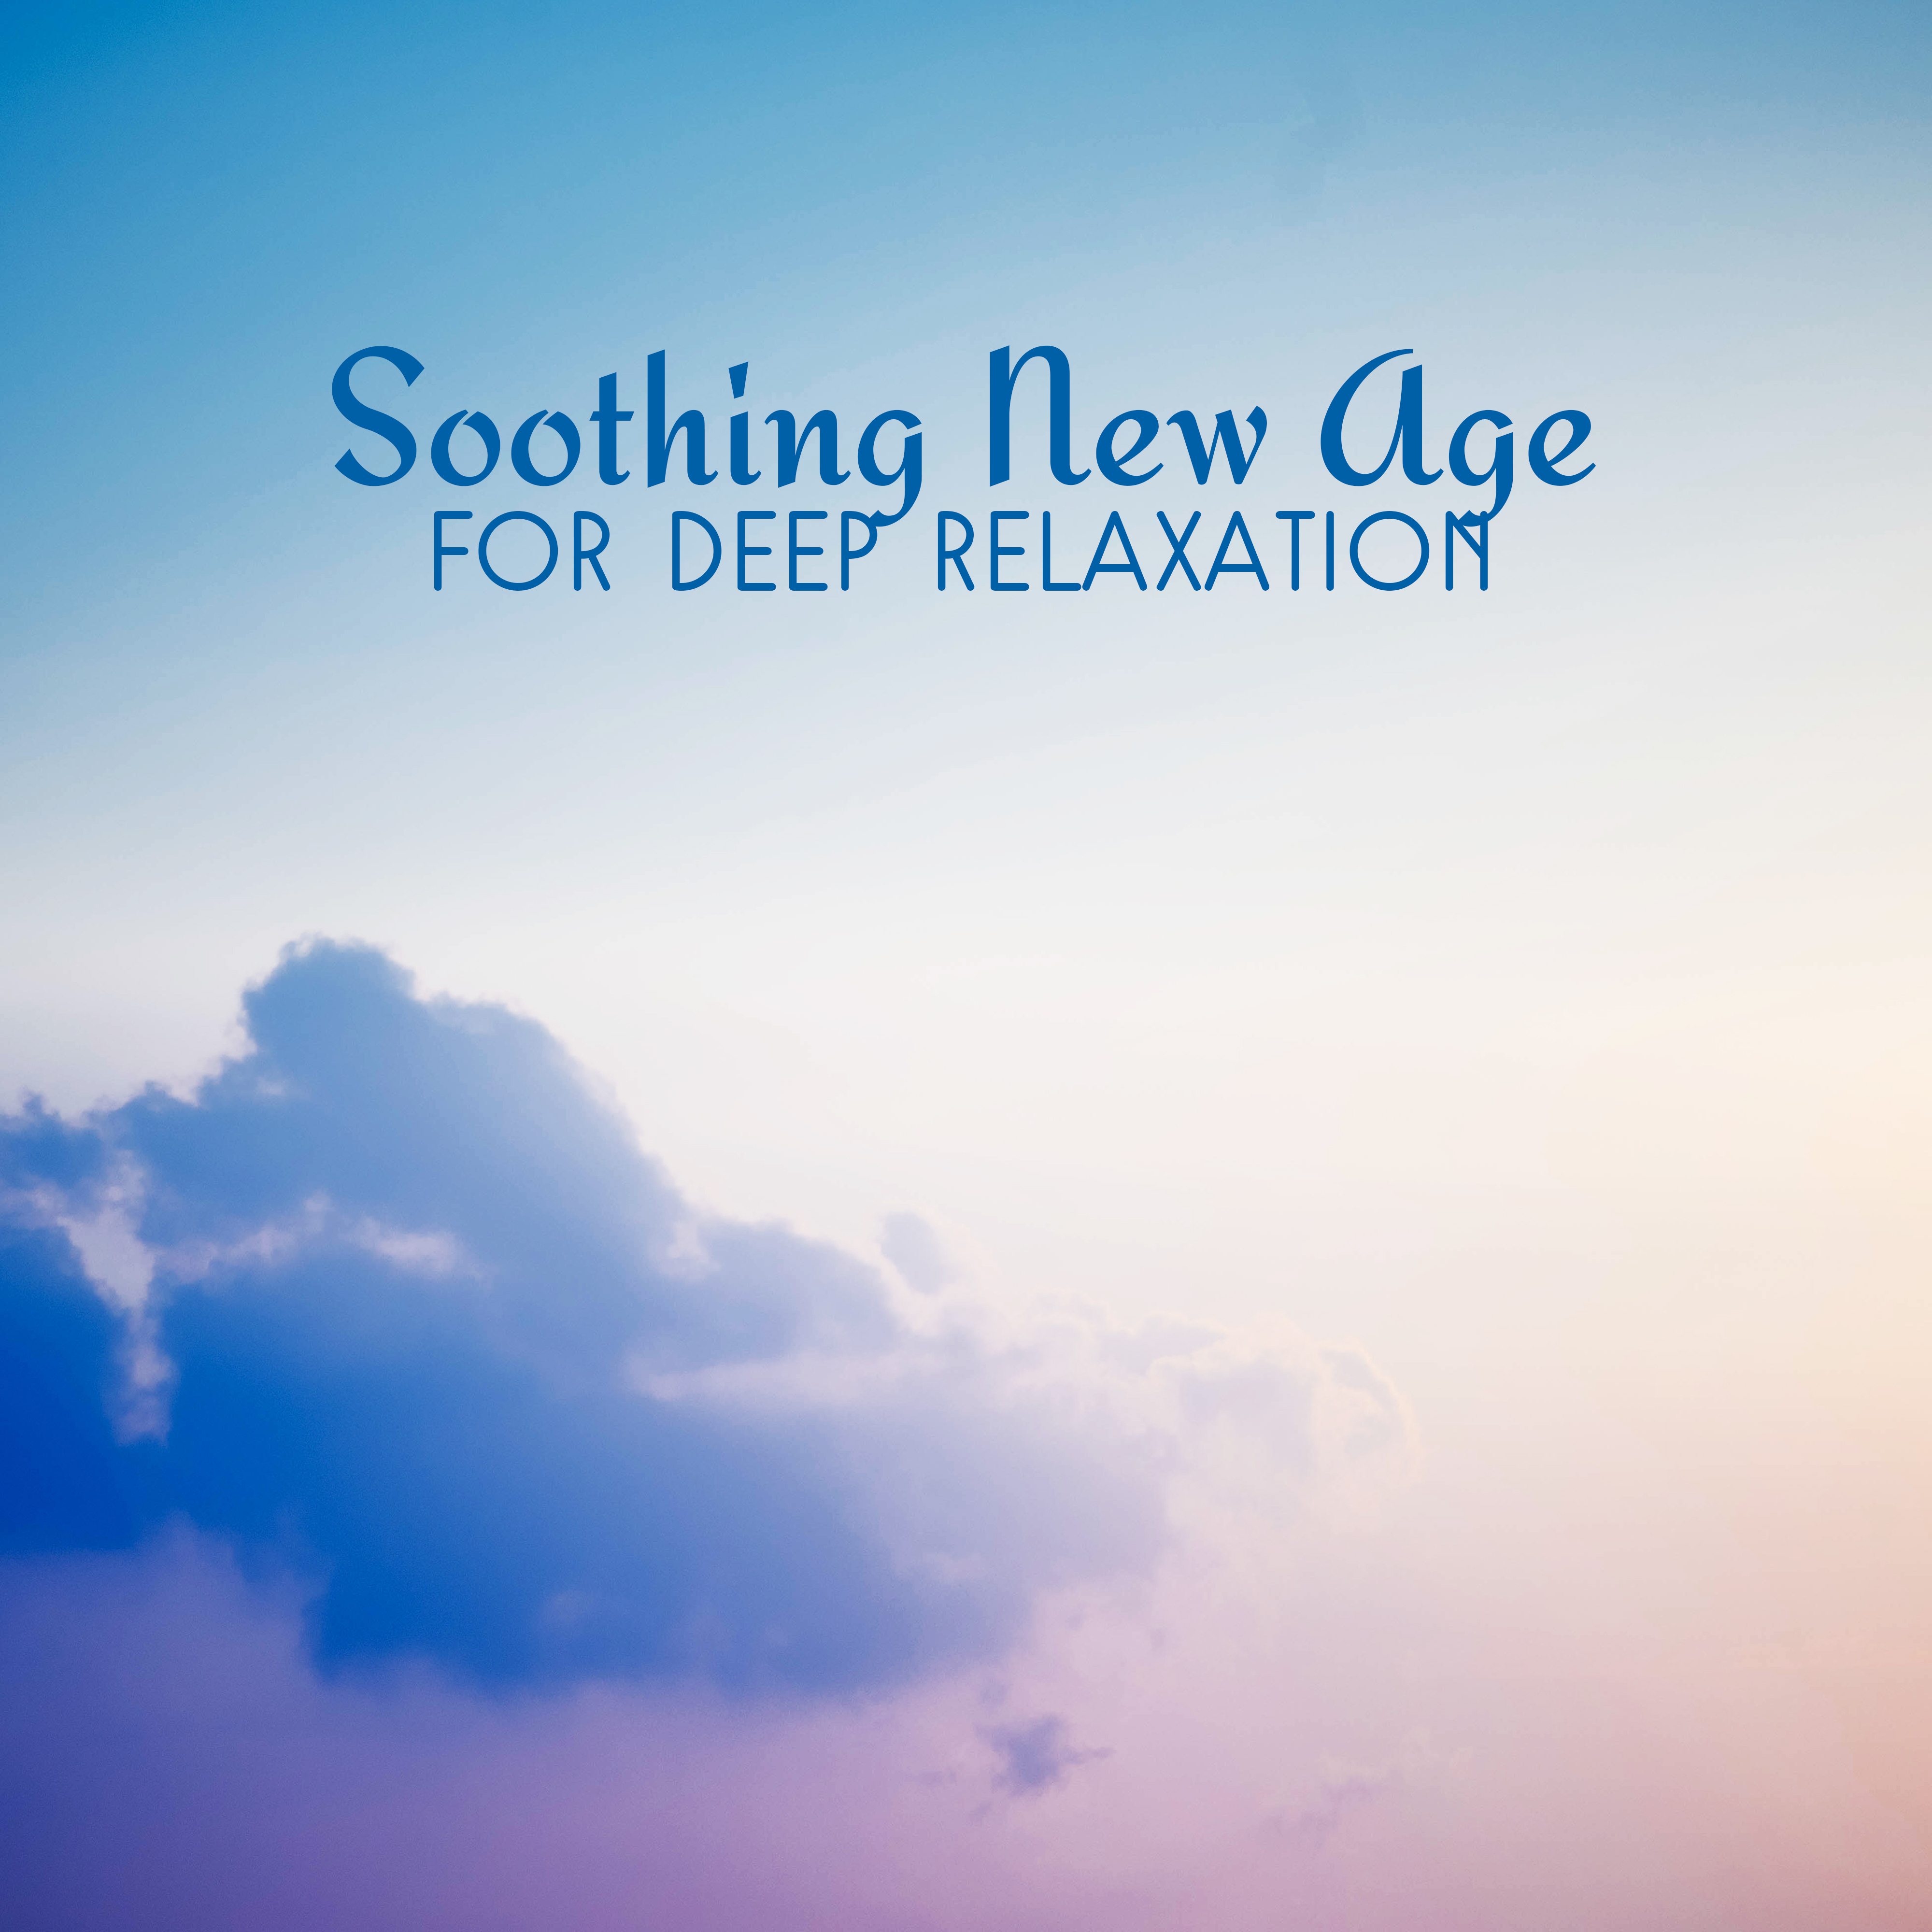 Soothing New Age for Deep Relaxation